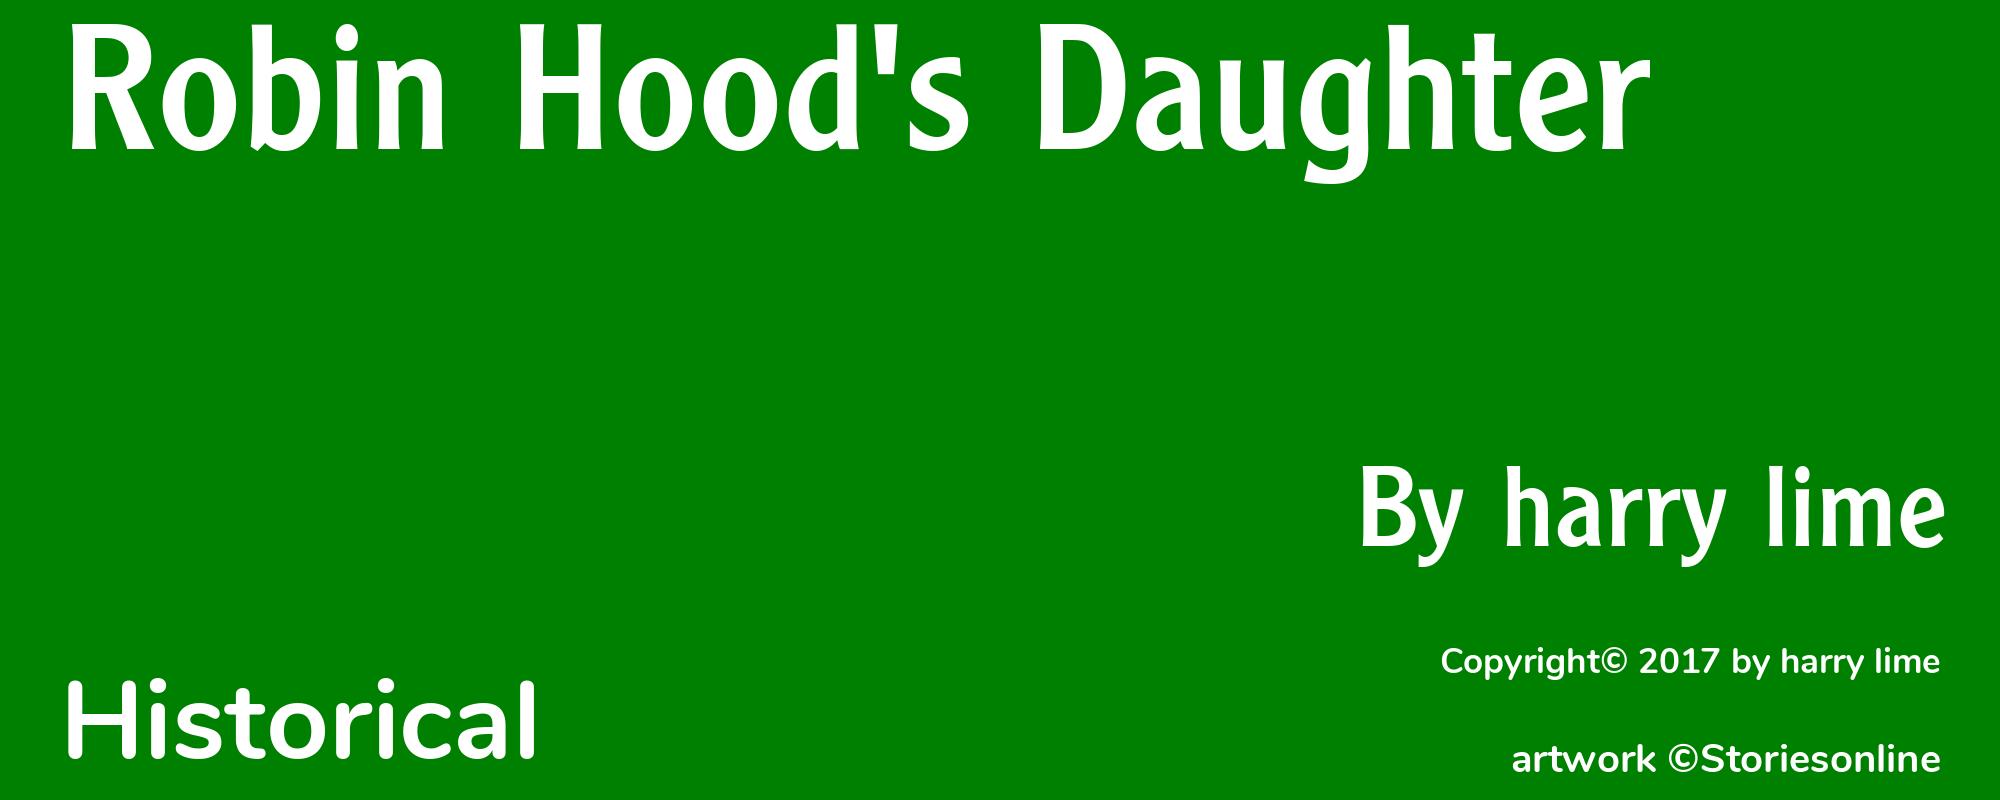 Robin Hood's Daughter - Cover